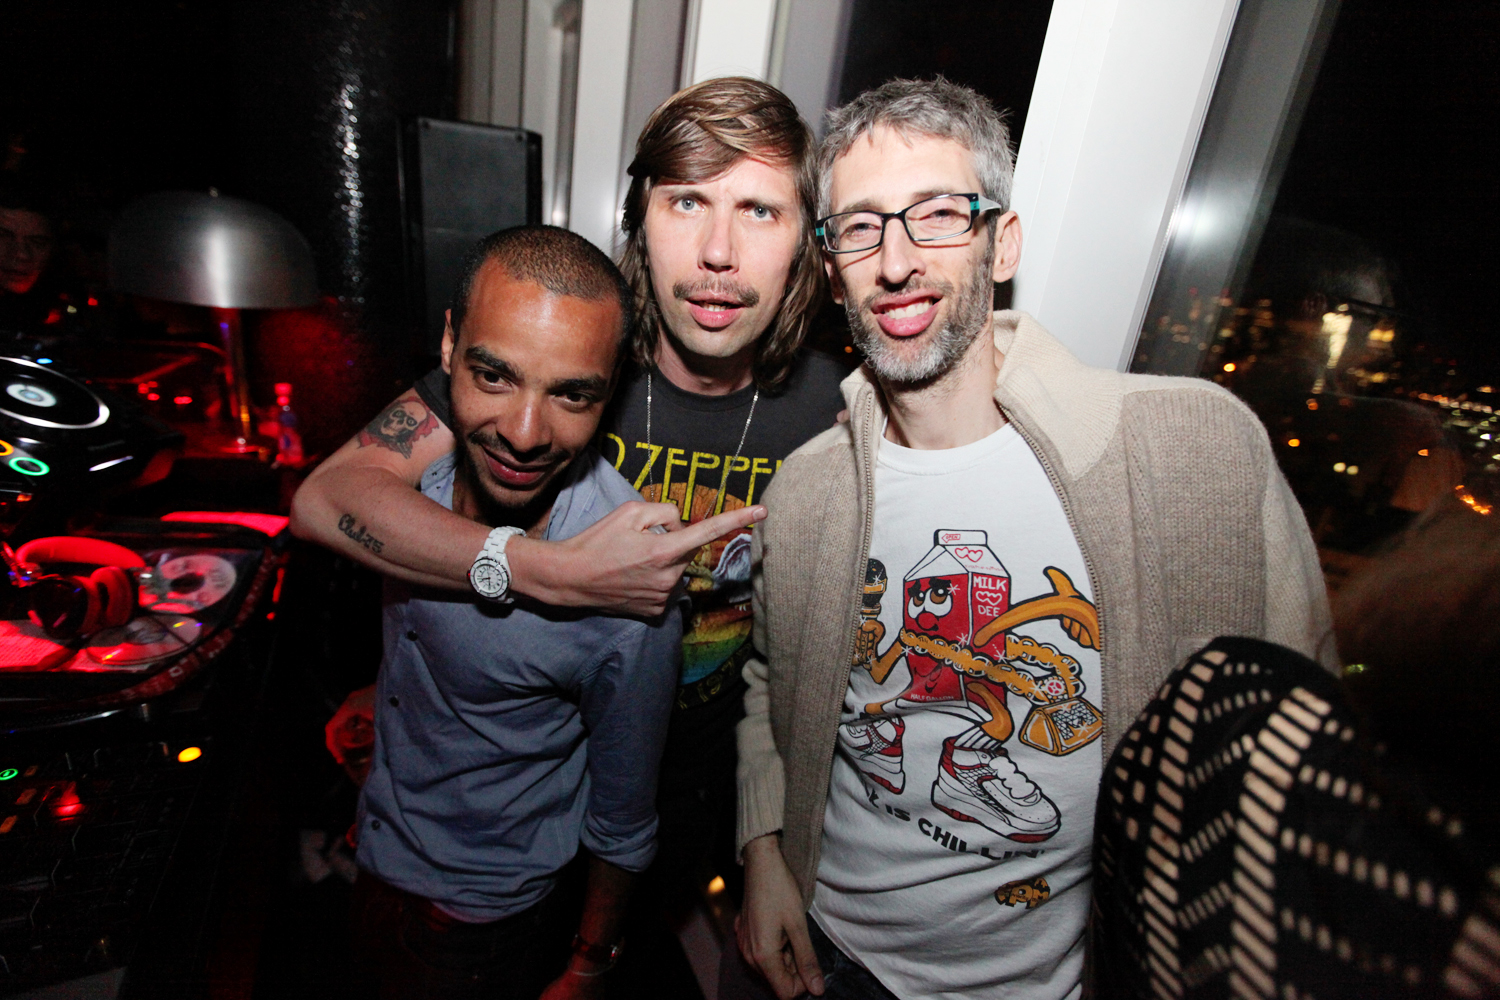 DJ Mehdi (Mehdi Faveris-Essadi), Busy P (Pedro Winter) and Stretch Armstrong in the DJ Booth at Le Bain in NYC